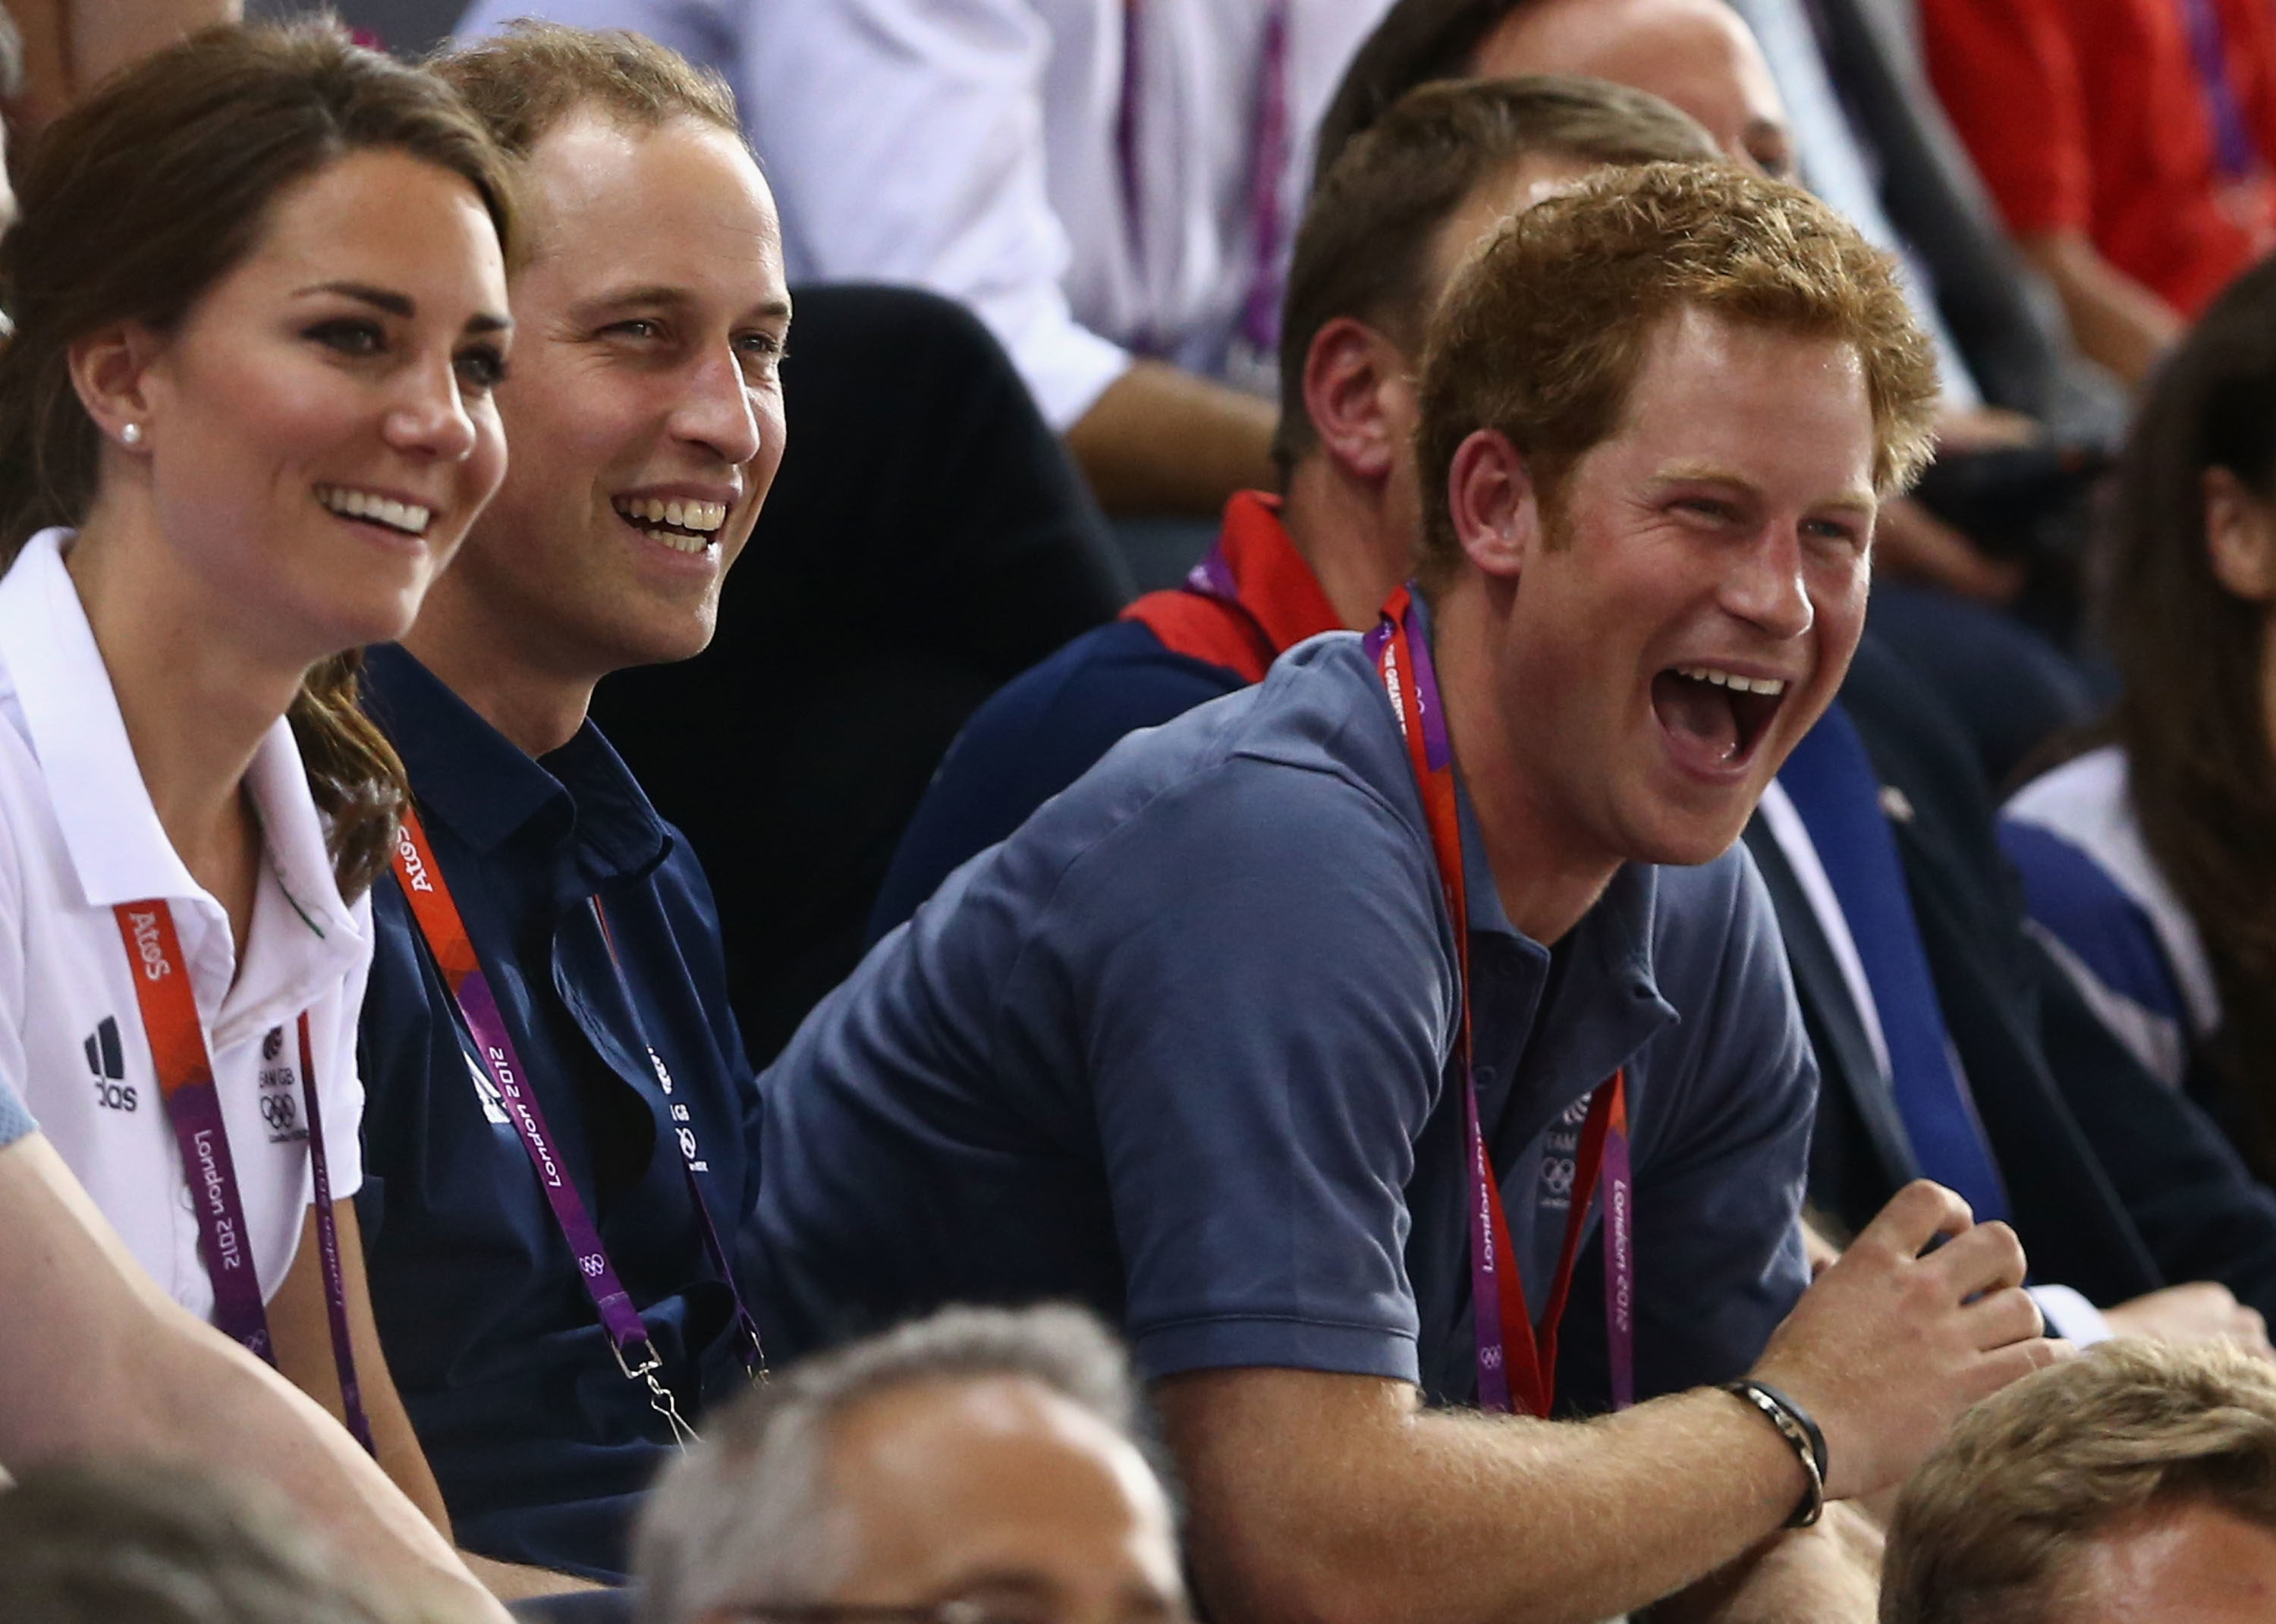 Prince Harry laughing alongside Kate Middleton and Prince William